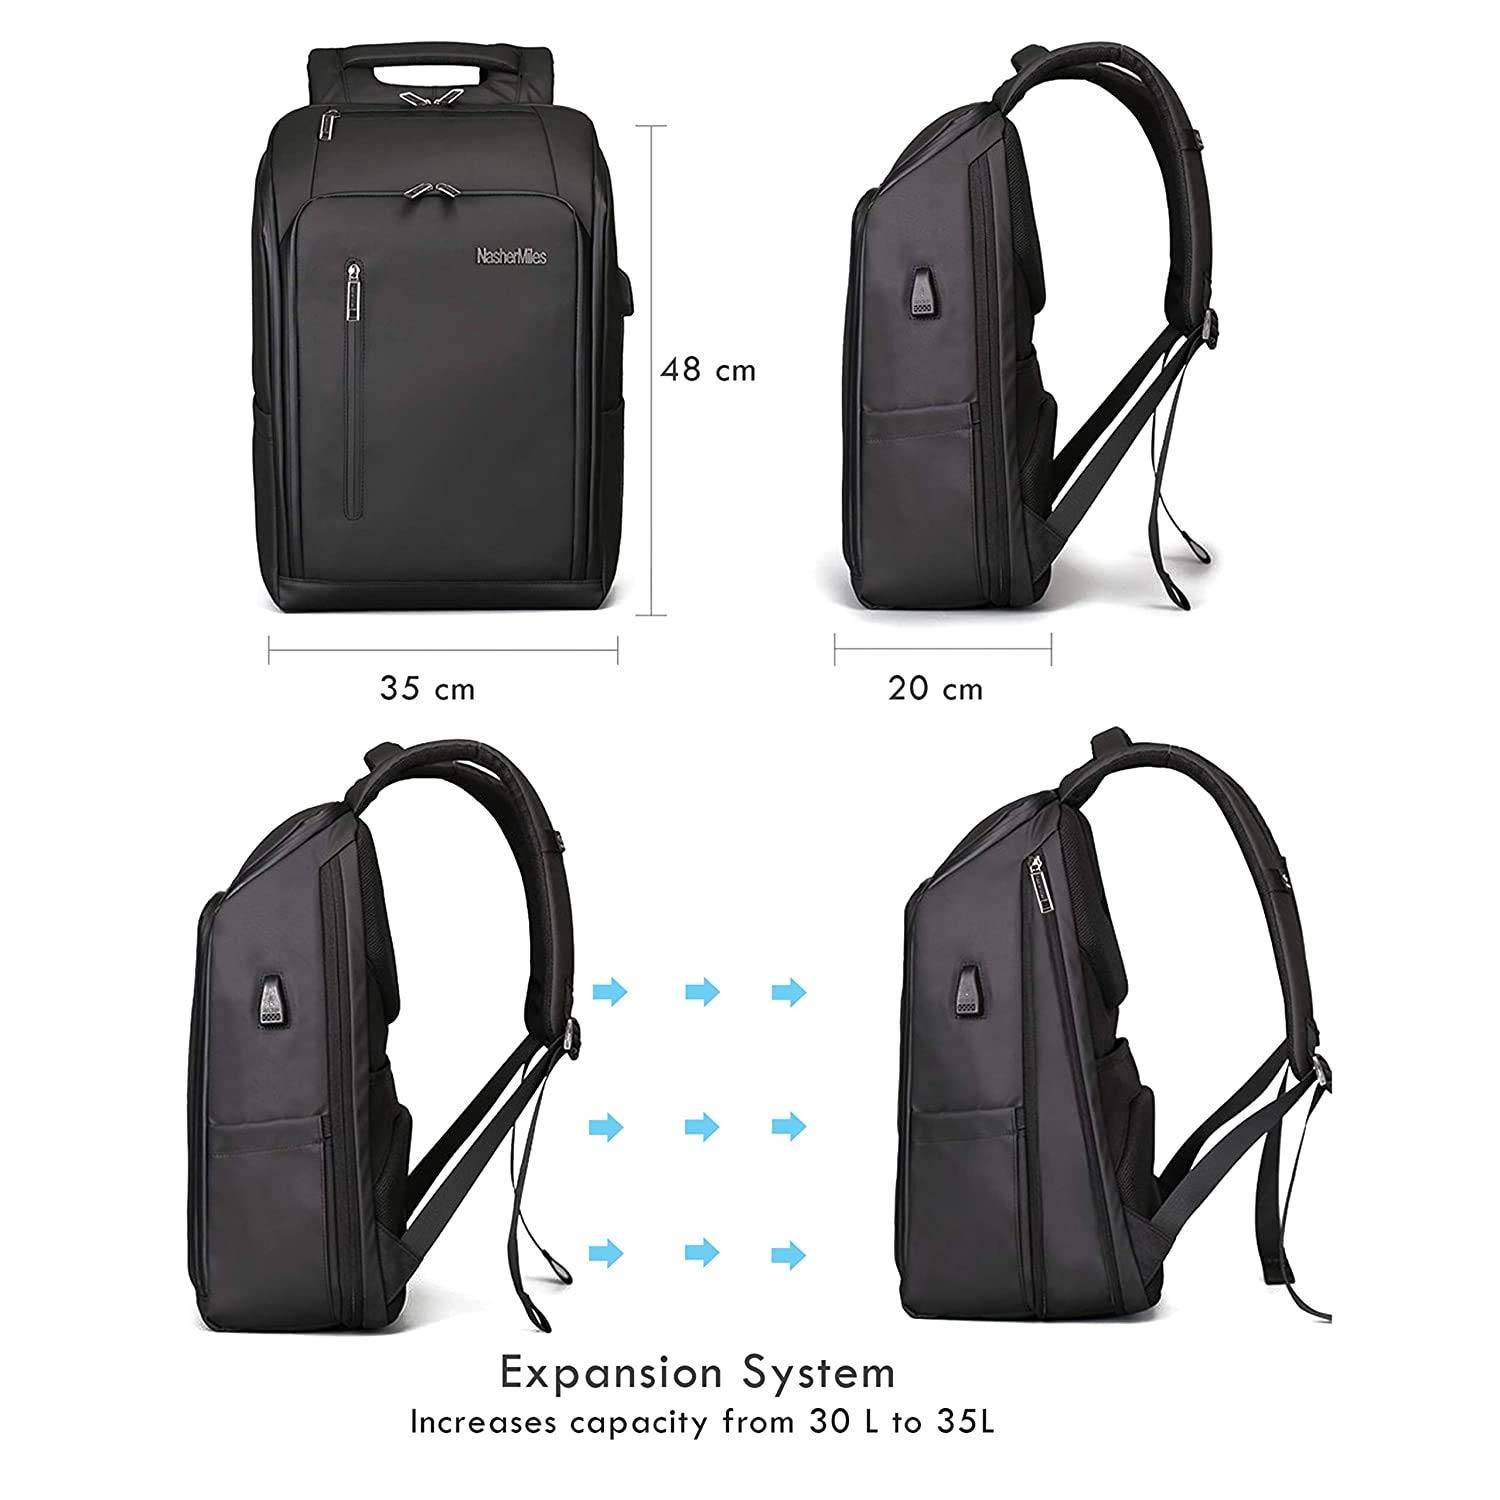 Provo Corporate Backpack